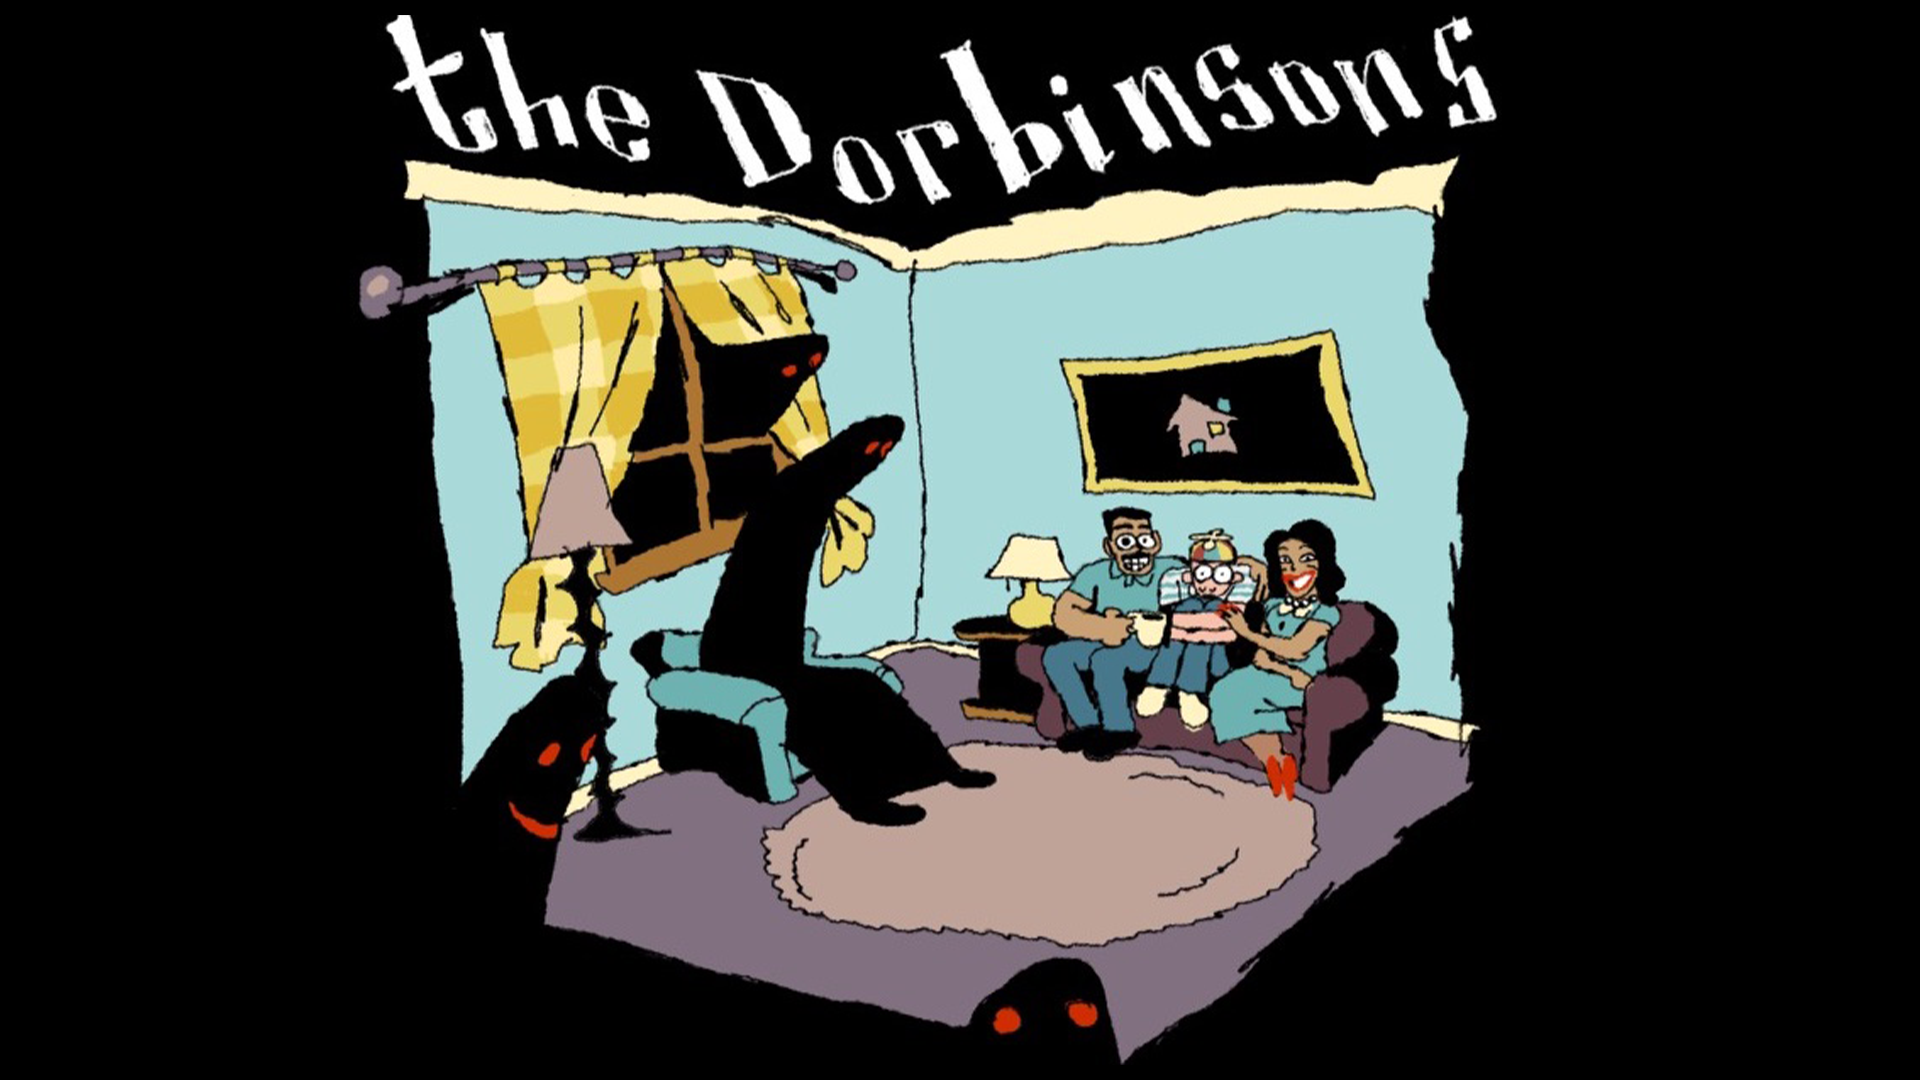 Illustrated Image of Family sitting on the couch surrounded by dark figures scattered throughout the room.